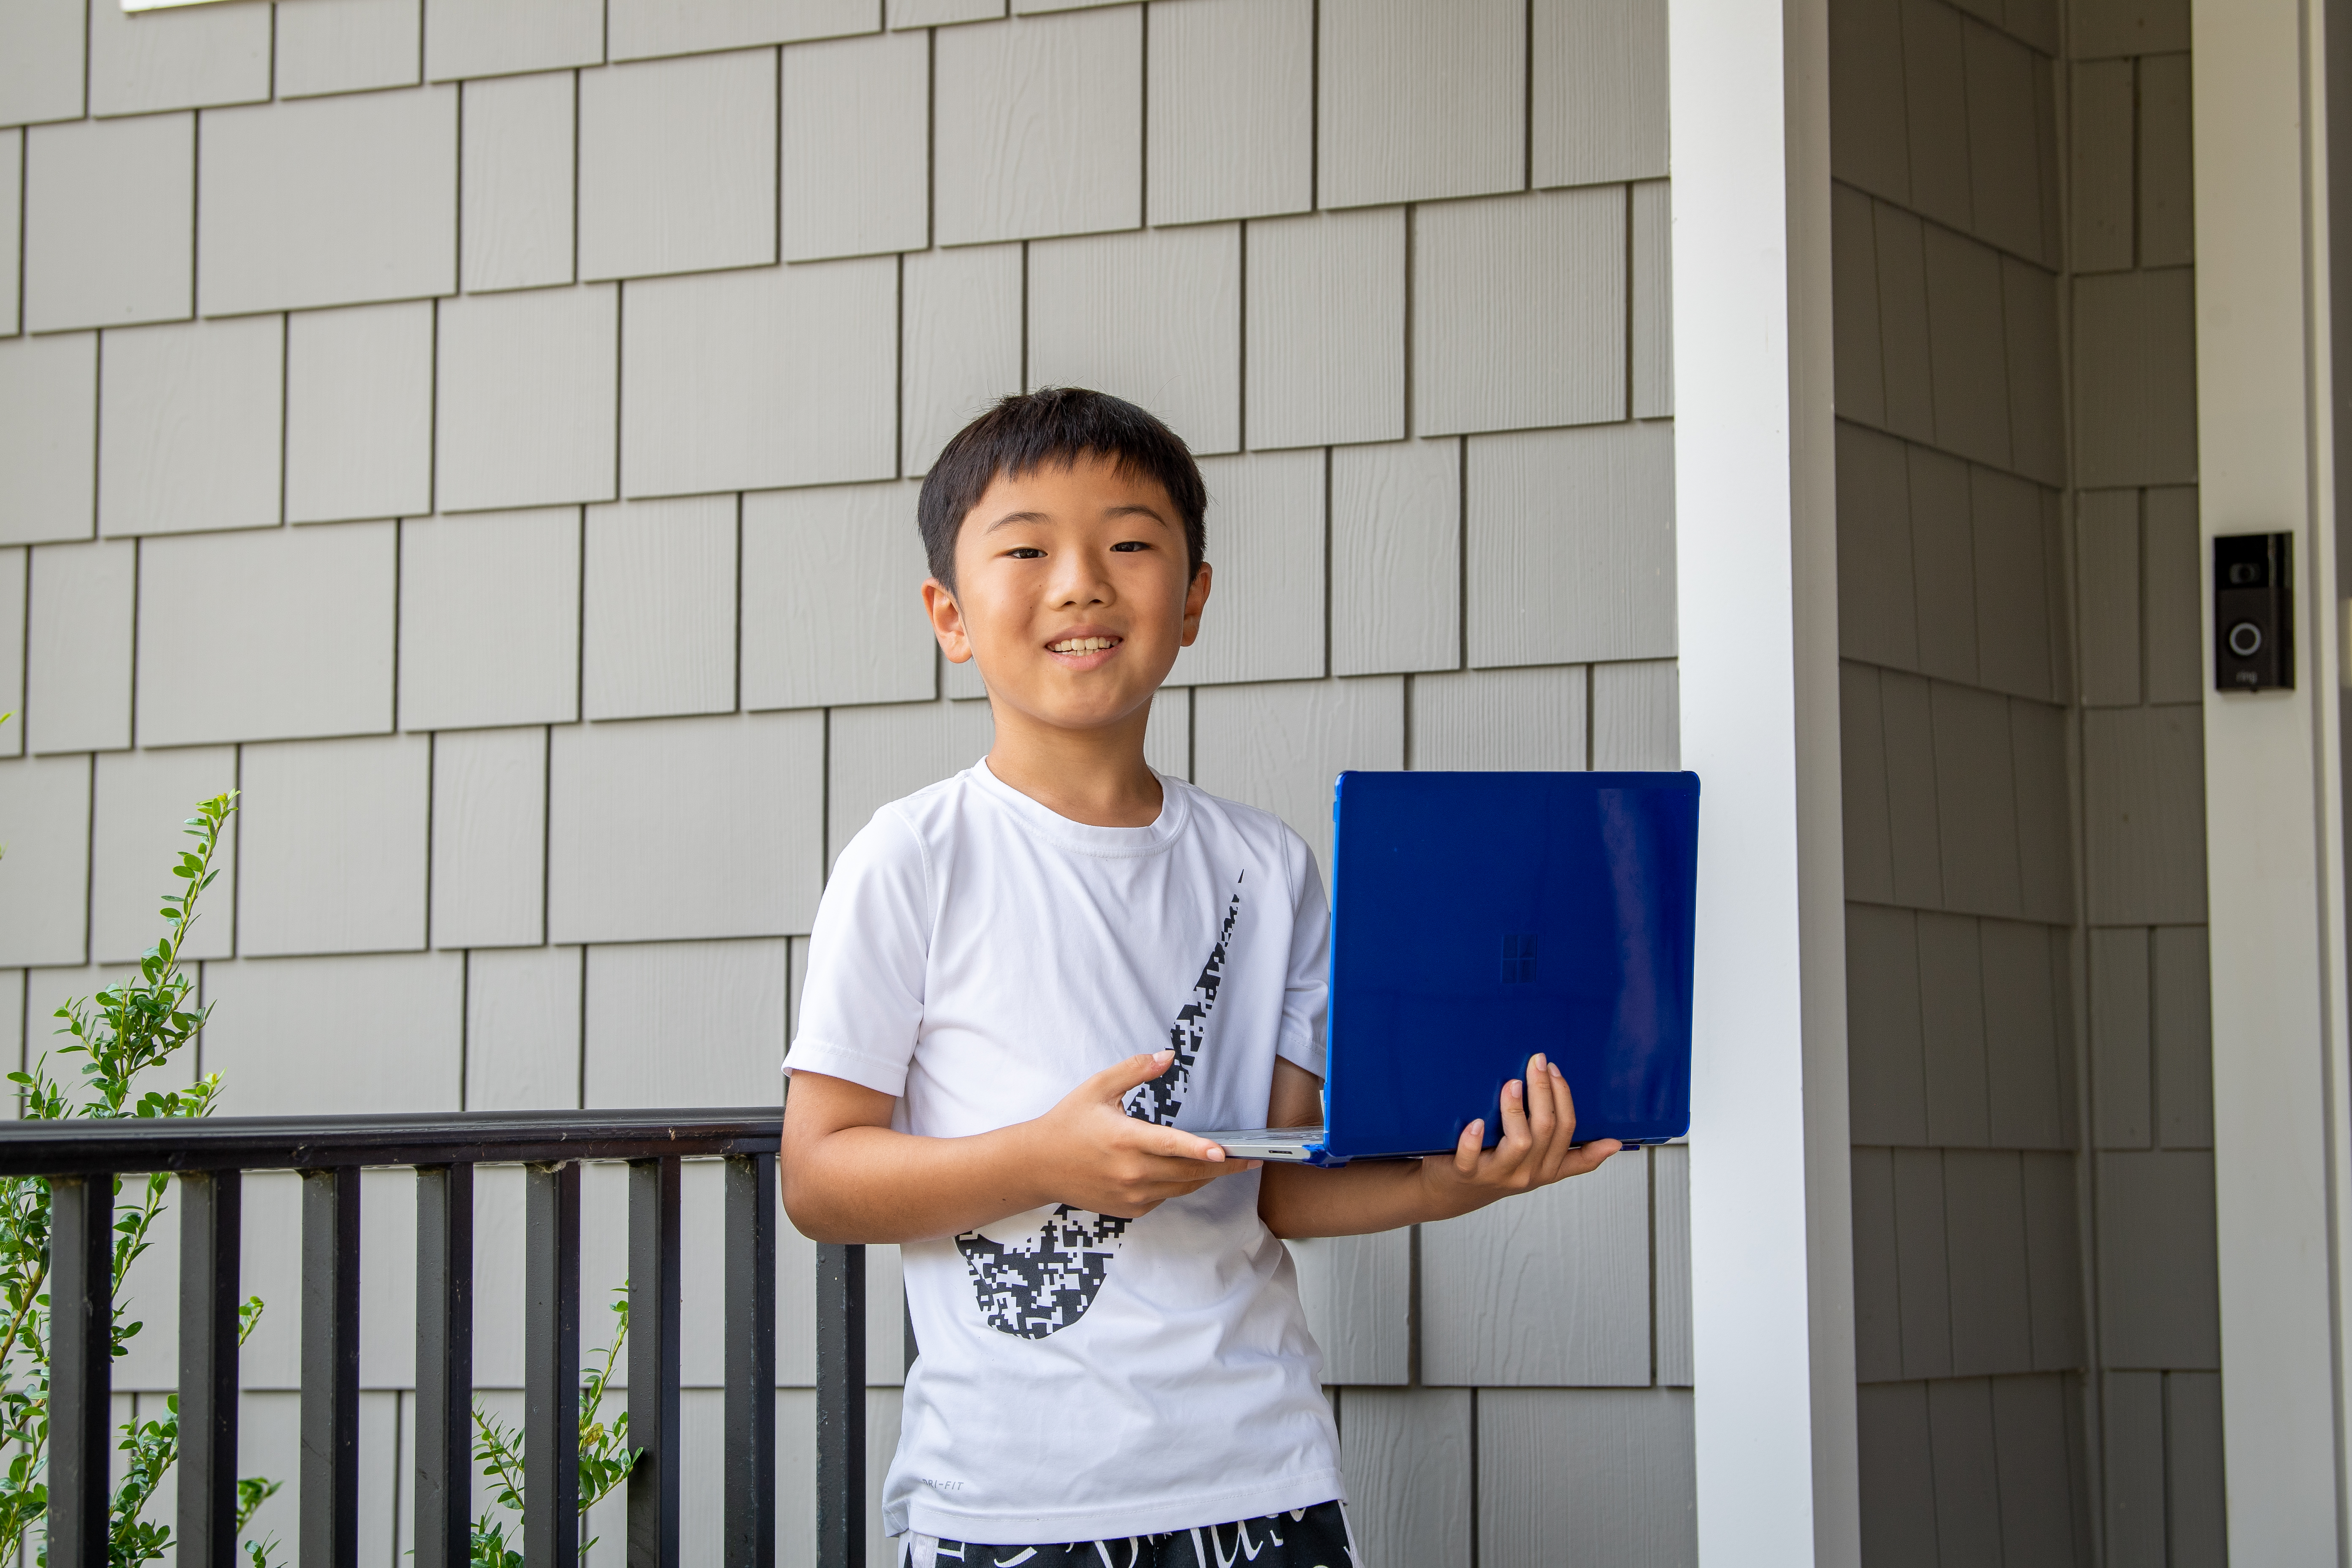 Ethan Zhang, age 9 and a Time for Kids student journalist winner, stands in front of his home with laptop in hand.